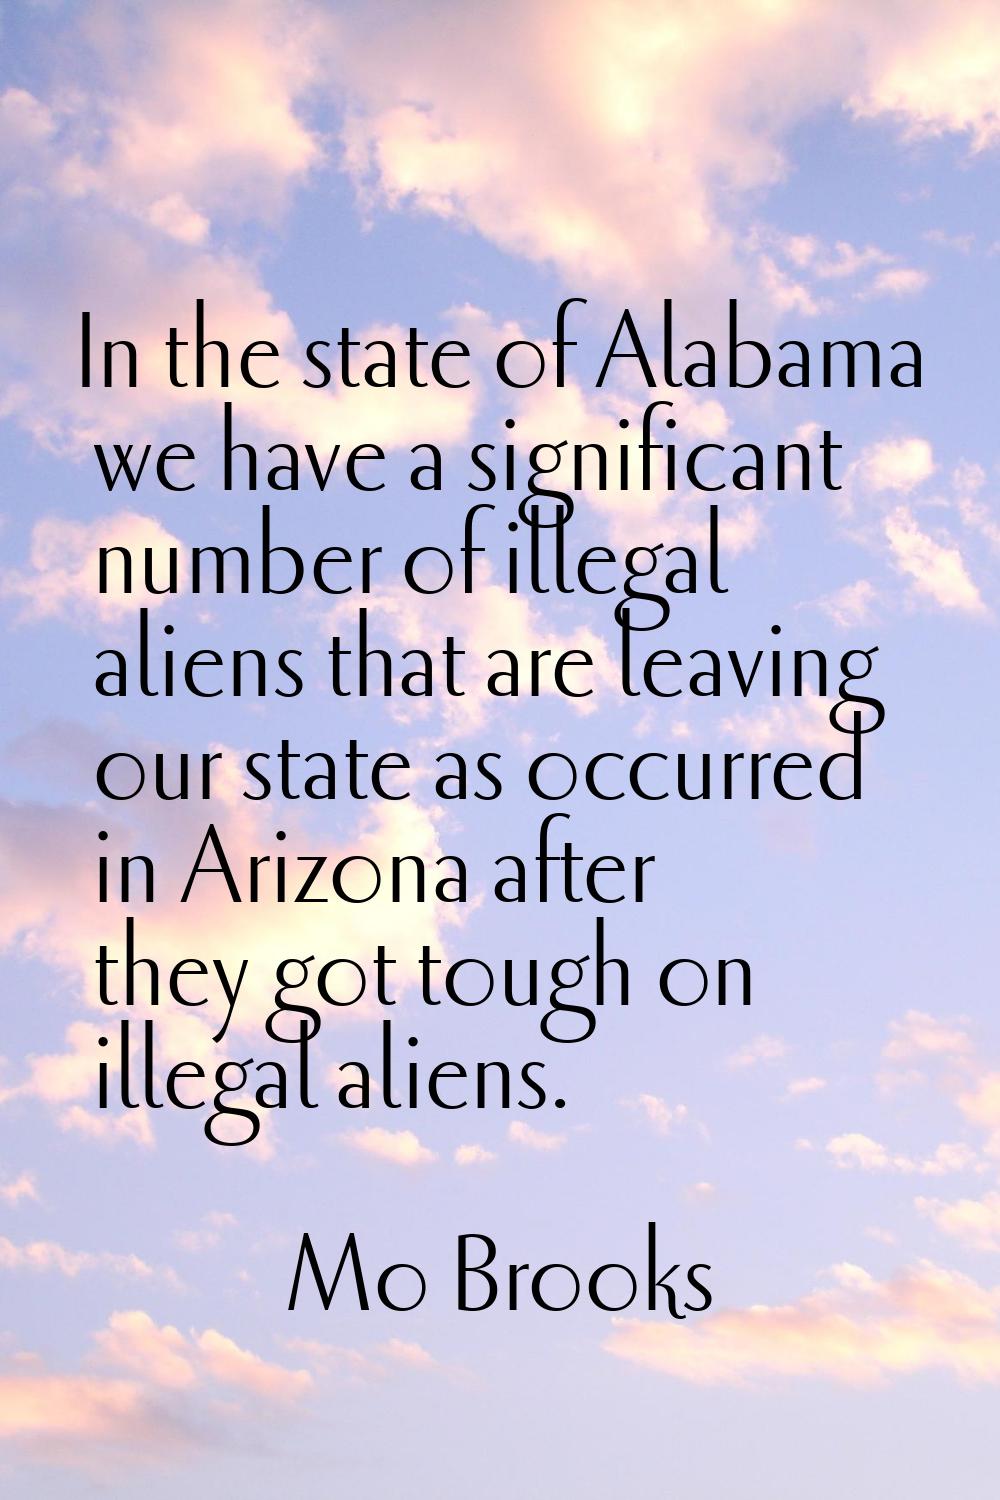 In the state of Alabama we have a significant number of illegal aliens that are leaving our state a